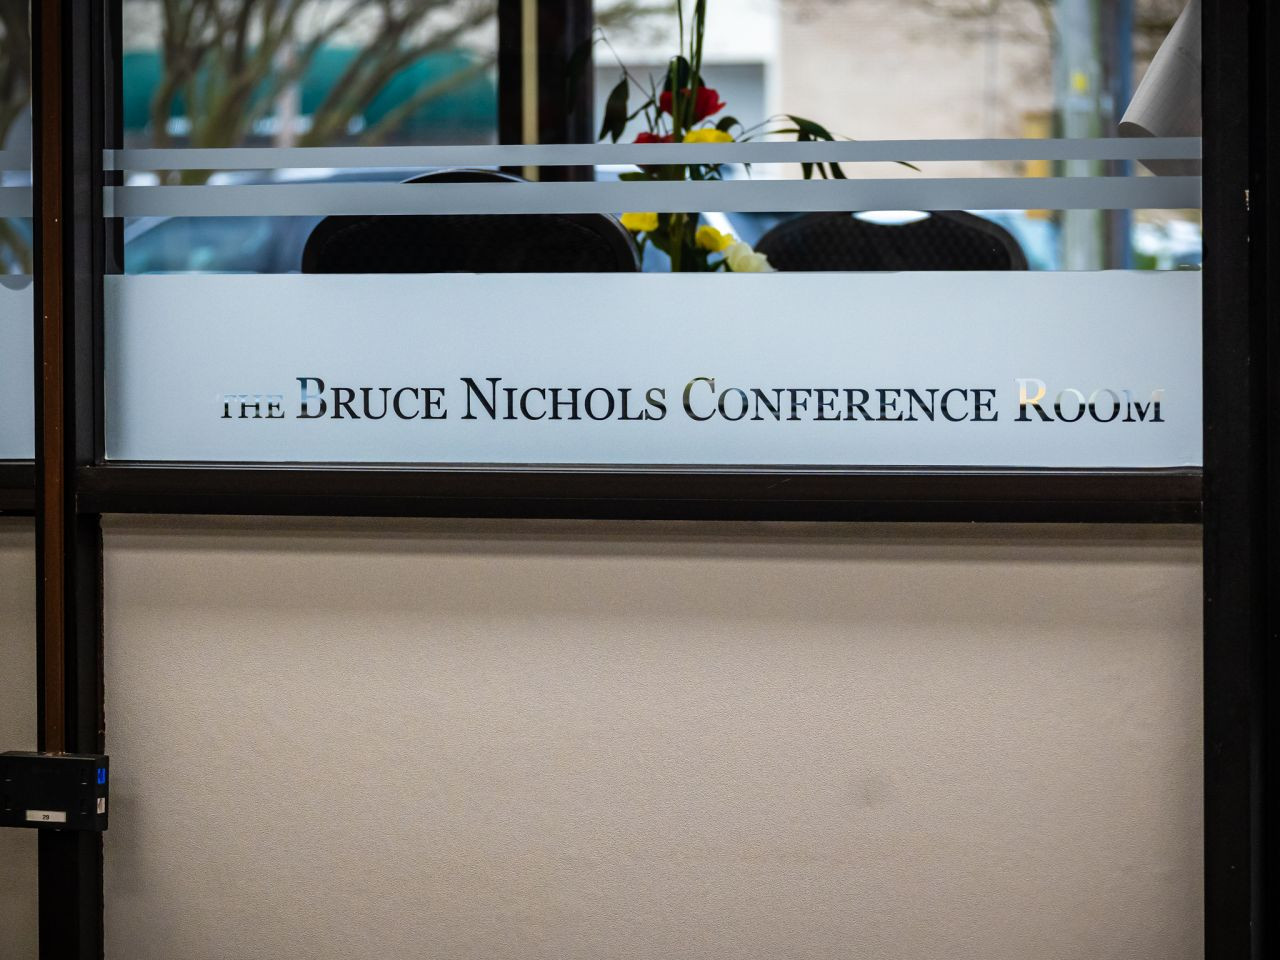 The Bruce Nichols Conference Room